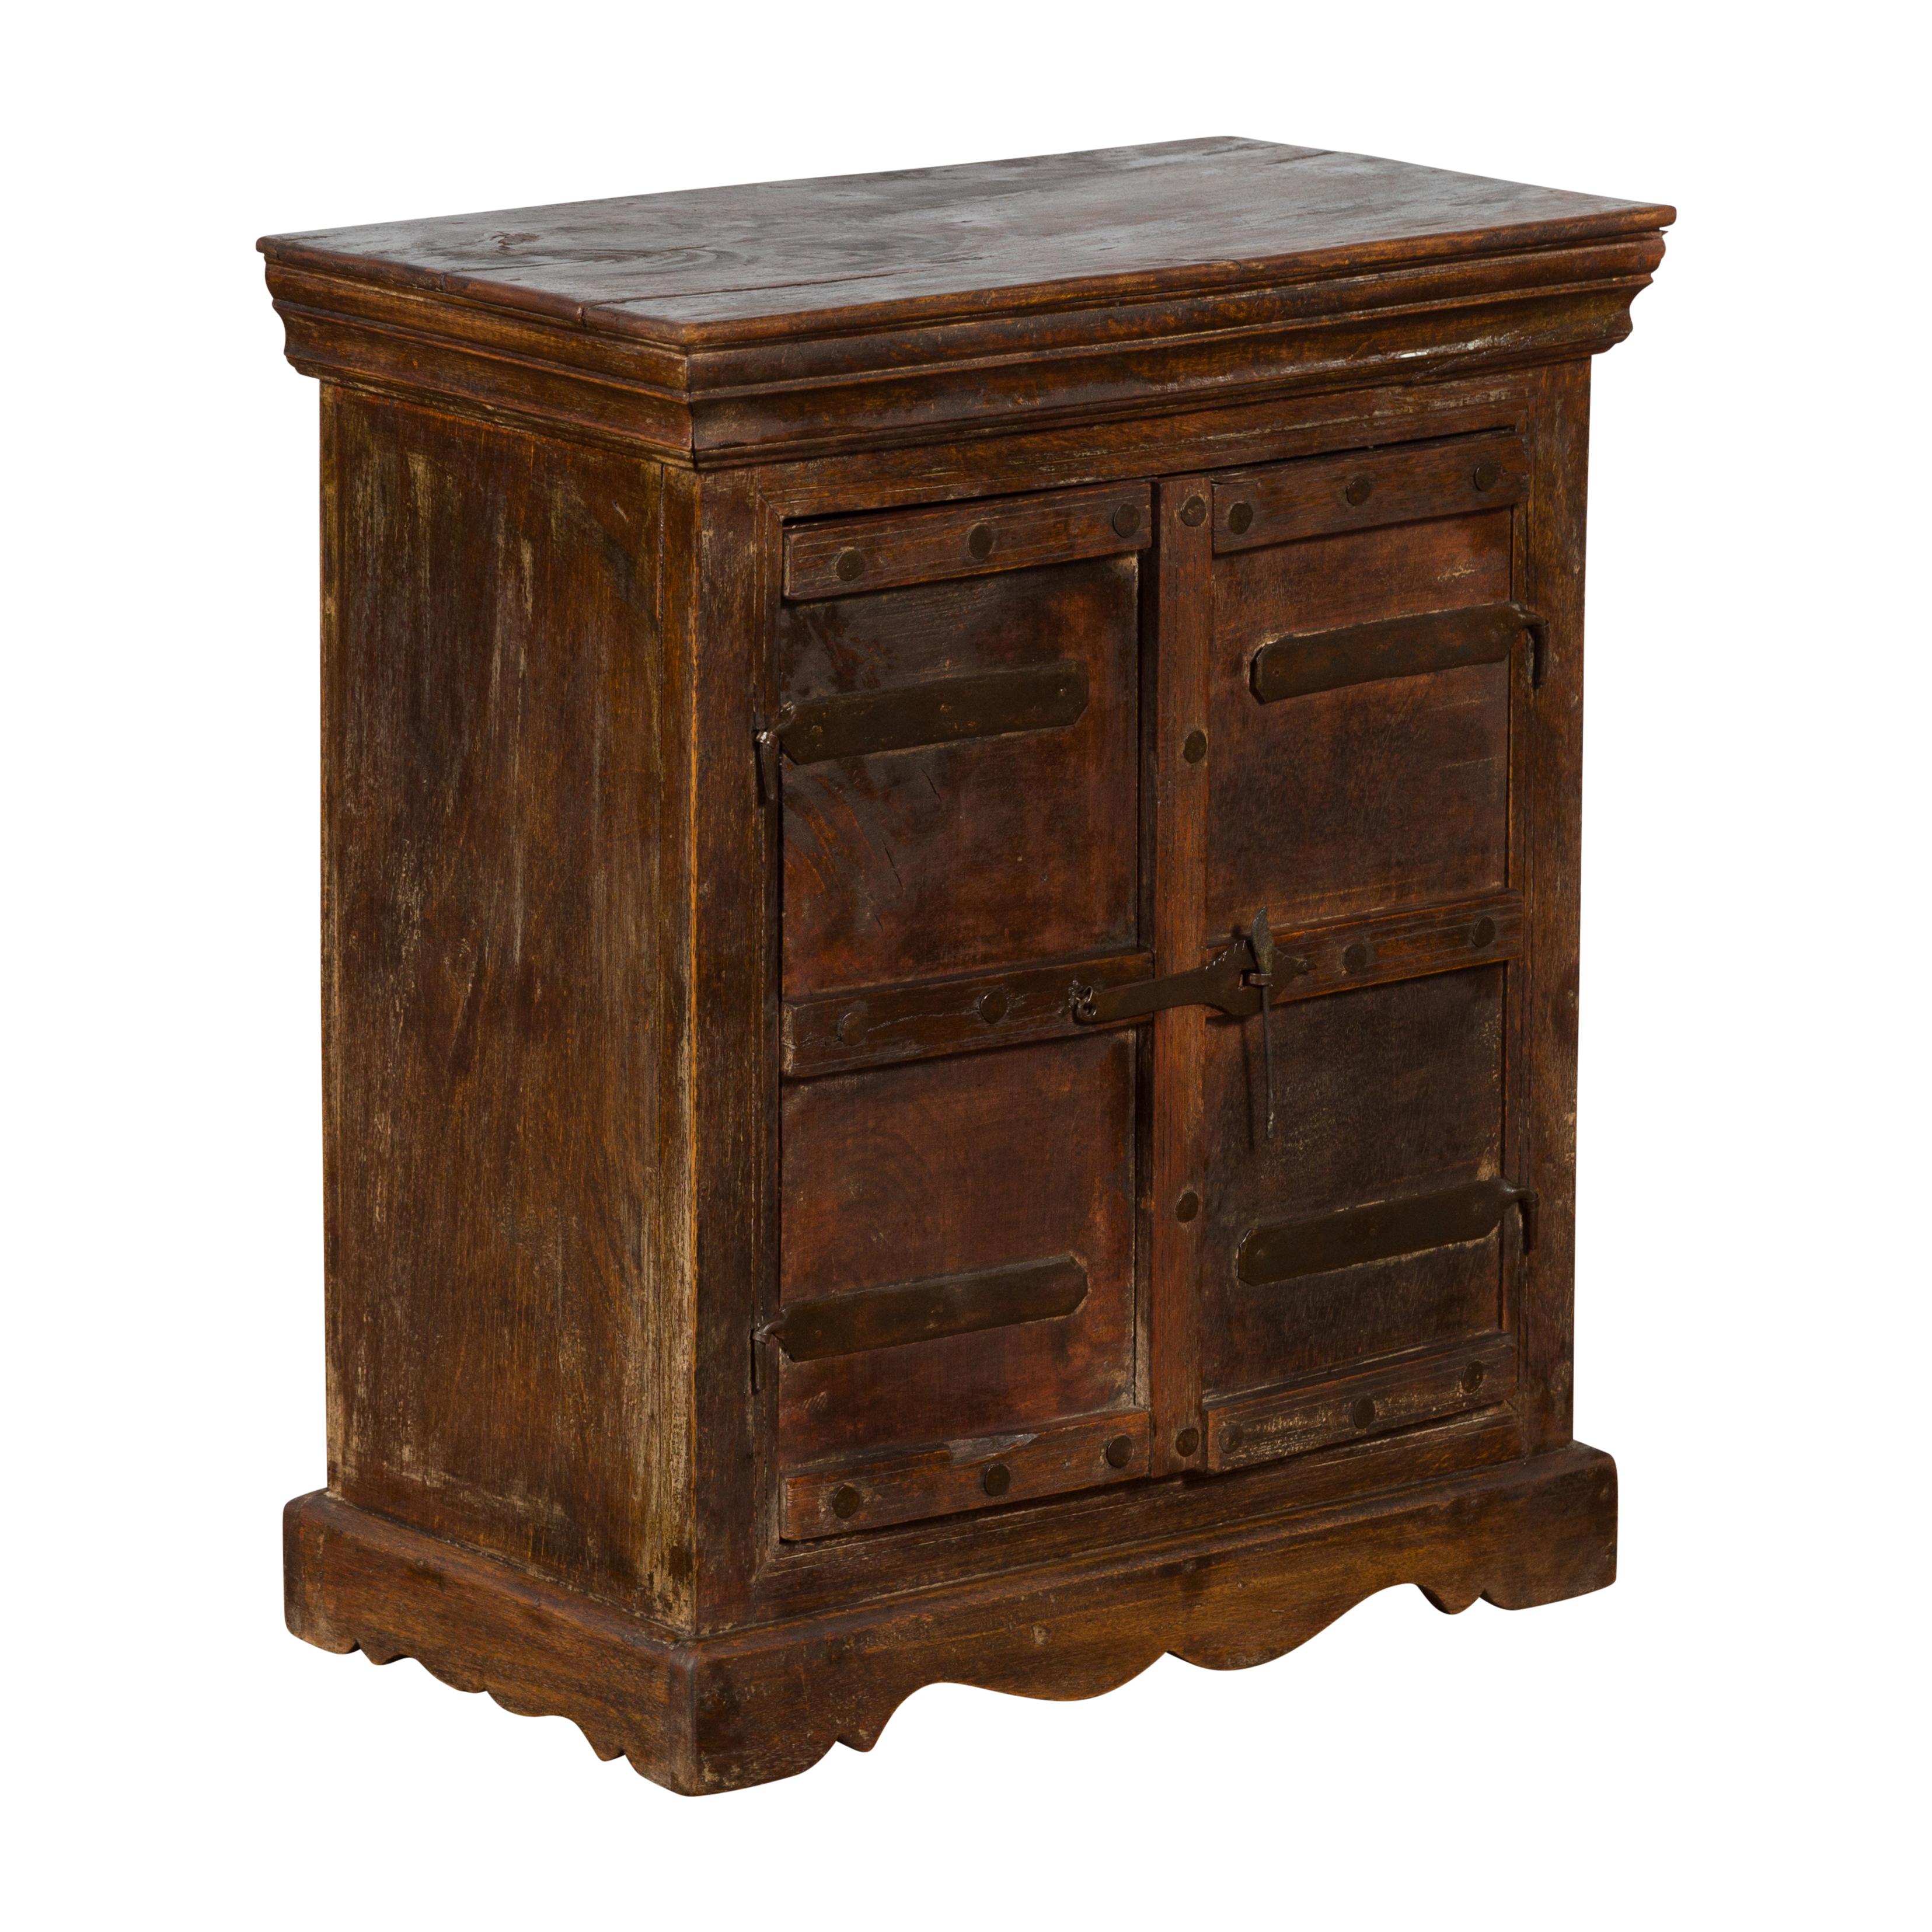 A vintage Indian sheesham wood bedside cabinet from the mid 20th century with dark finish, iron hardware, scalloped plinth and rustic character. Created in India during the Midcentury period, this rustic small sheesham wood bedside cabinet features